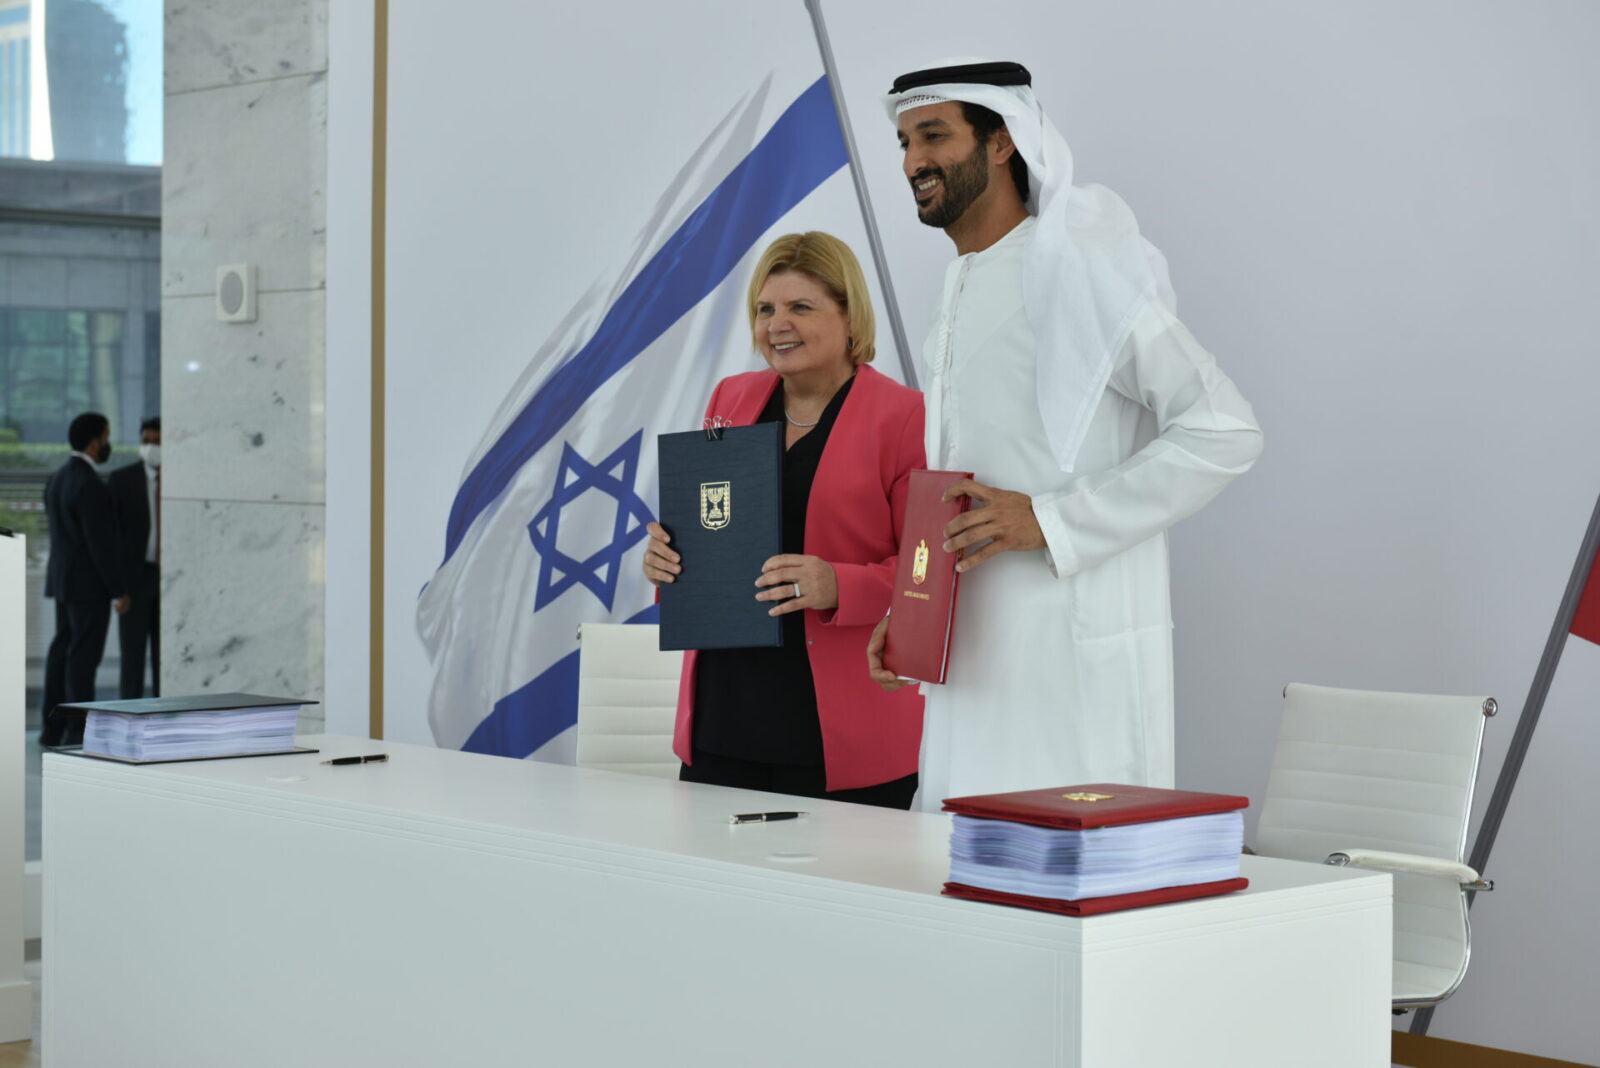 Israel’s Economy and Industry Minister Orna Barbivau and her counterpart, UAE Minister of Economy Abdulla bin Touq Al Marri sign the historic free trade agreement in Dubai. Photo by Anuj Taylor, Strap Studios